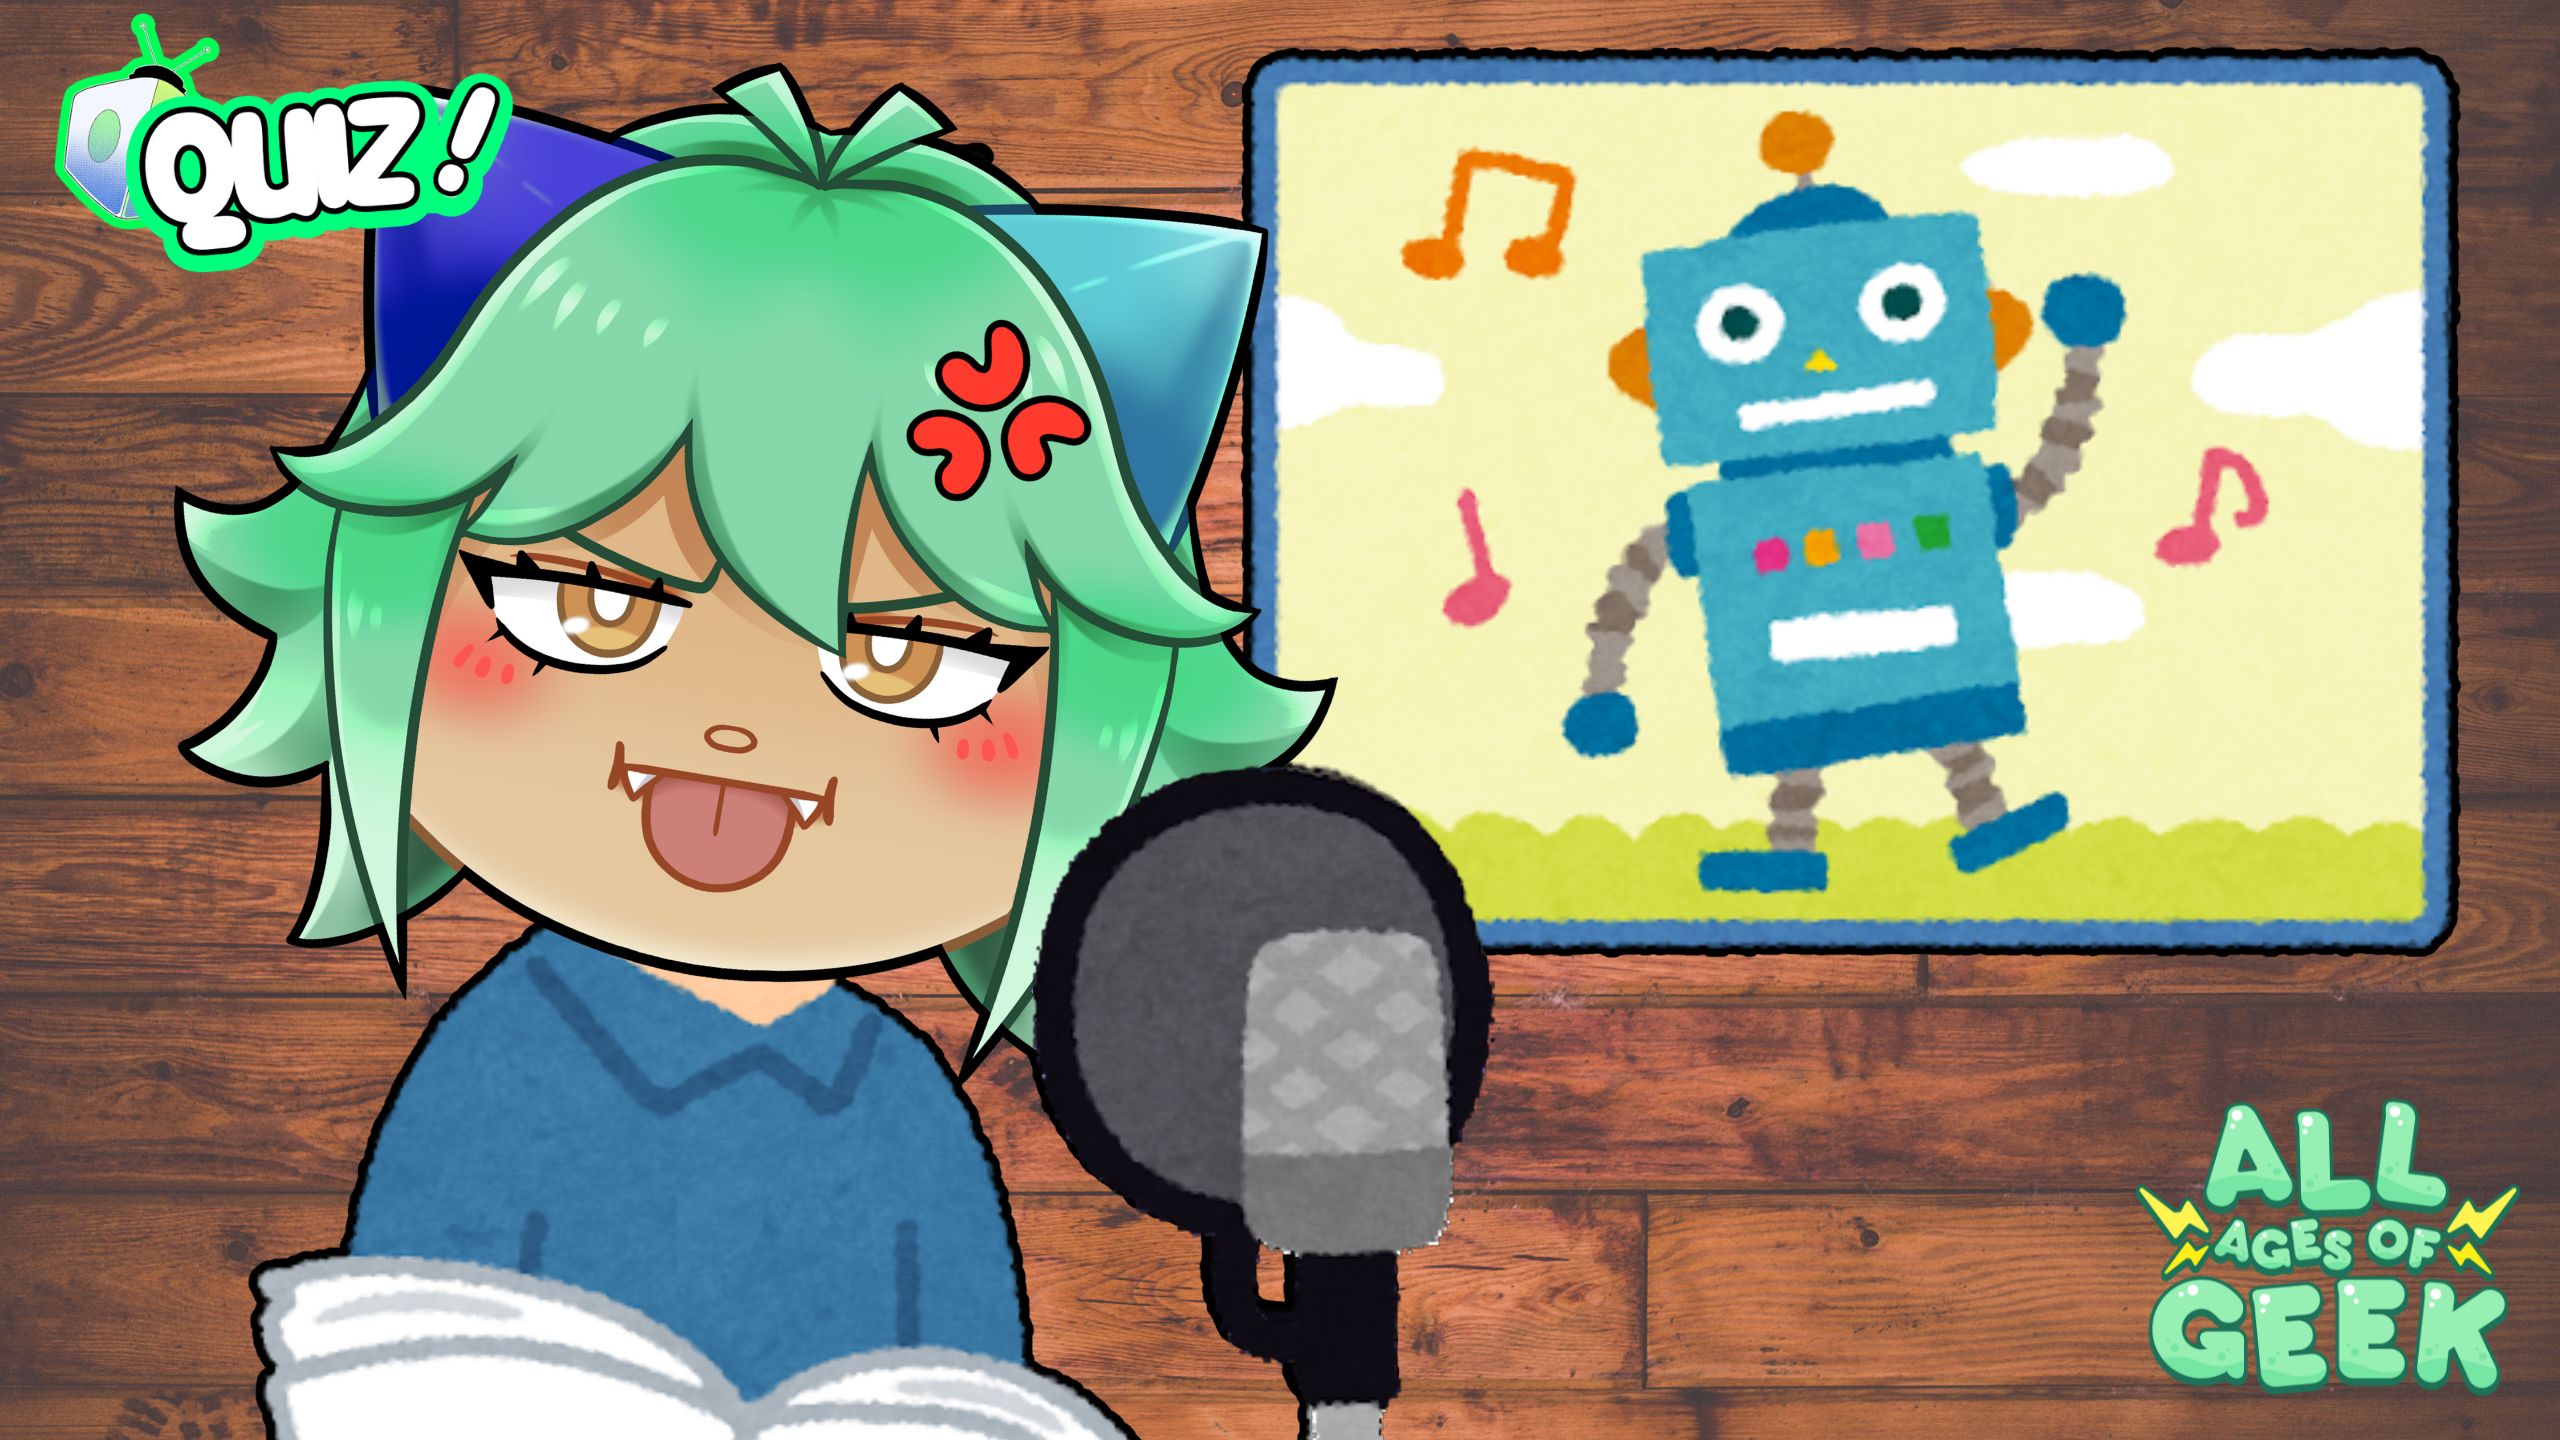 The image depicts a character with green hair and dragon horn ears, showing an expression of mild annoyance or frustration. They are in front of a microphone, suggesting they are either recording or speaking. In the background, there is an illustration of a cheerful, cartoon-style robot with musical notes around it, hinting at a fun and creative atmosphere. The words "Quiz!" and "All Ages of Geek" are present, indicating this could be part of an interactive or entertaining quiz segment designed for a broad audience, especially those interested in geek culture.